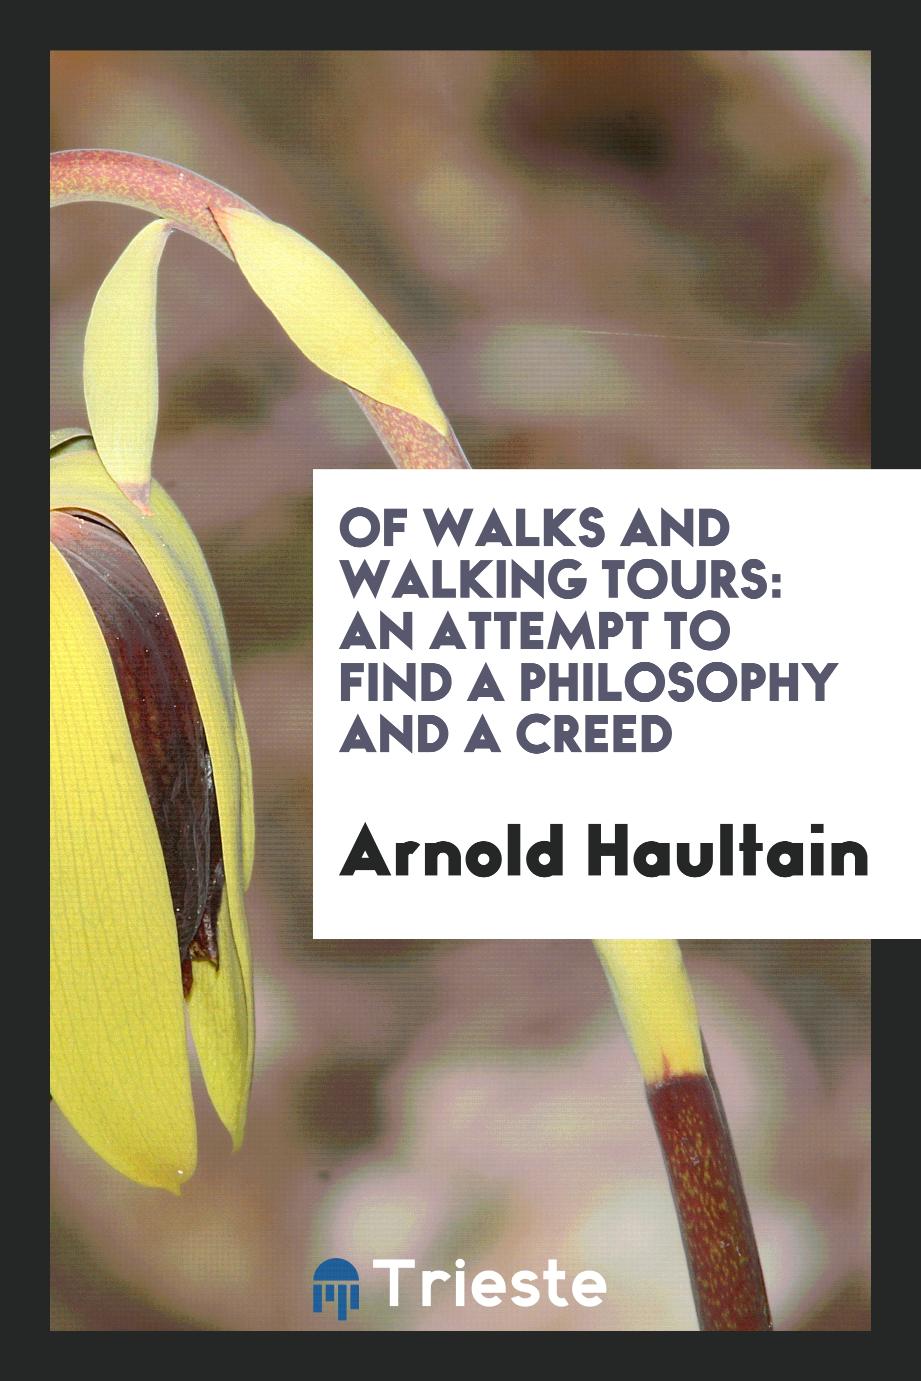 Of walks and walking tours: an attempt to find a philosophy and a creed